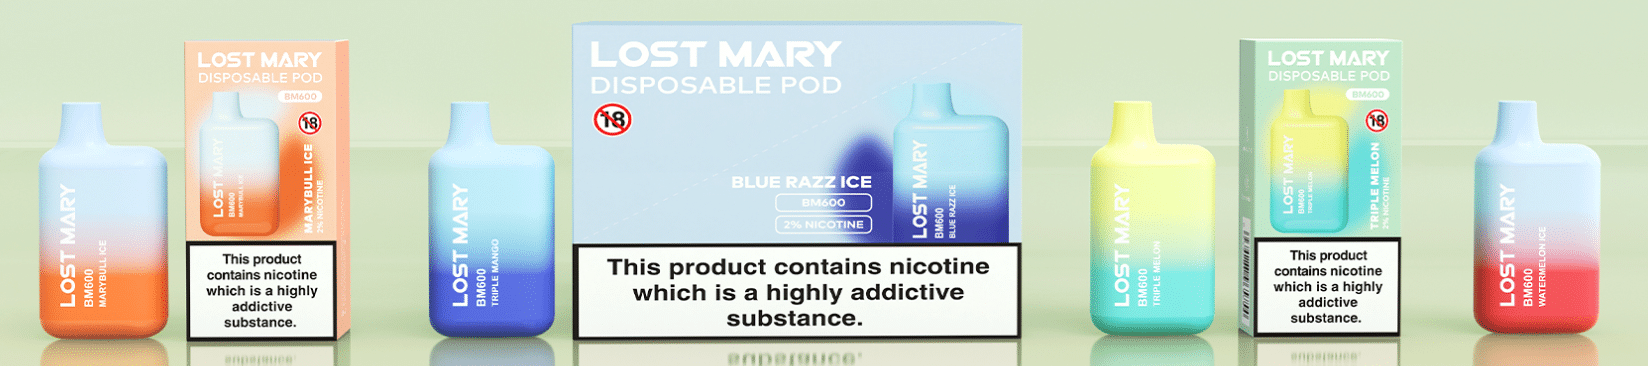 Lost Mary BM600 Disposable Vape Kit- in the box